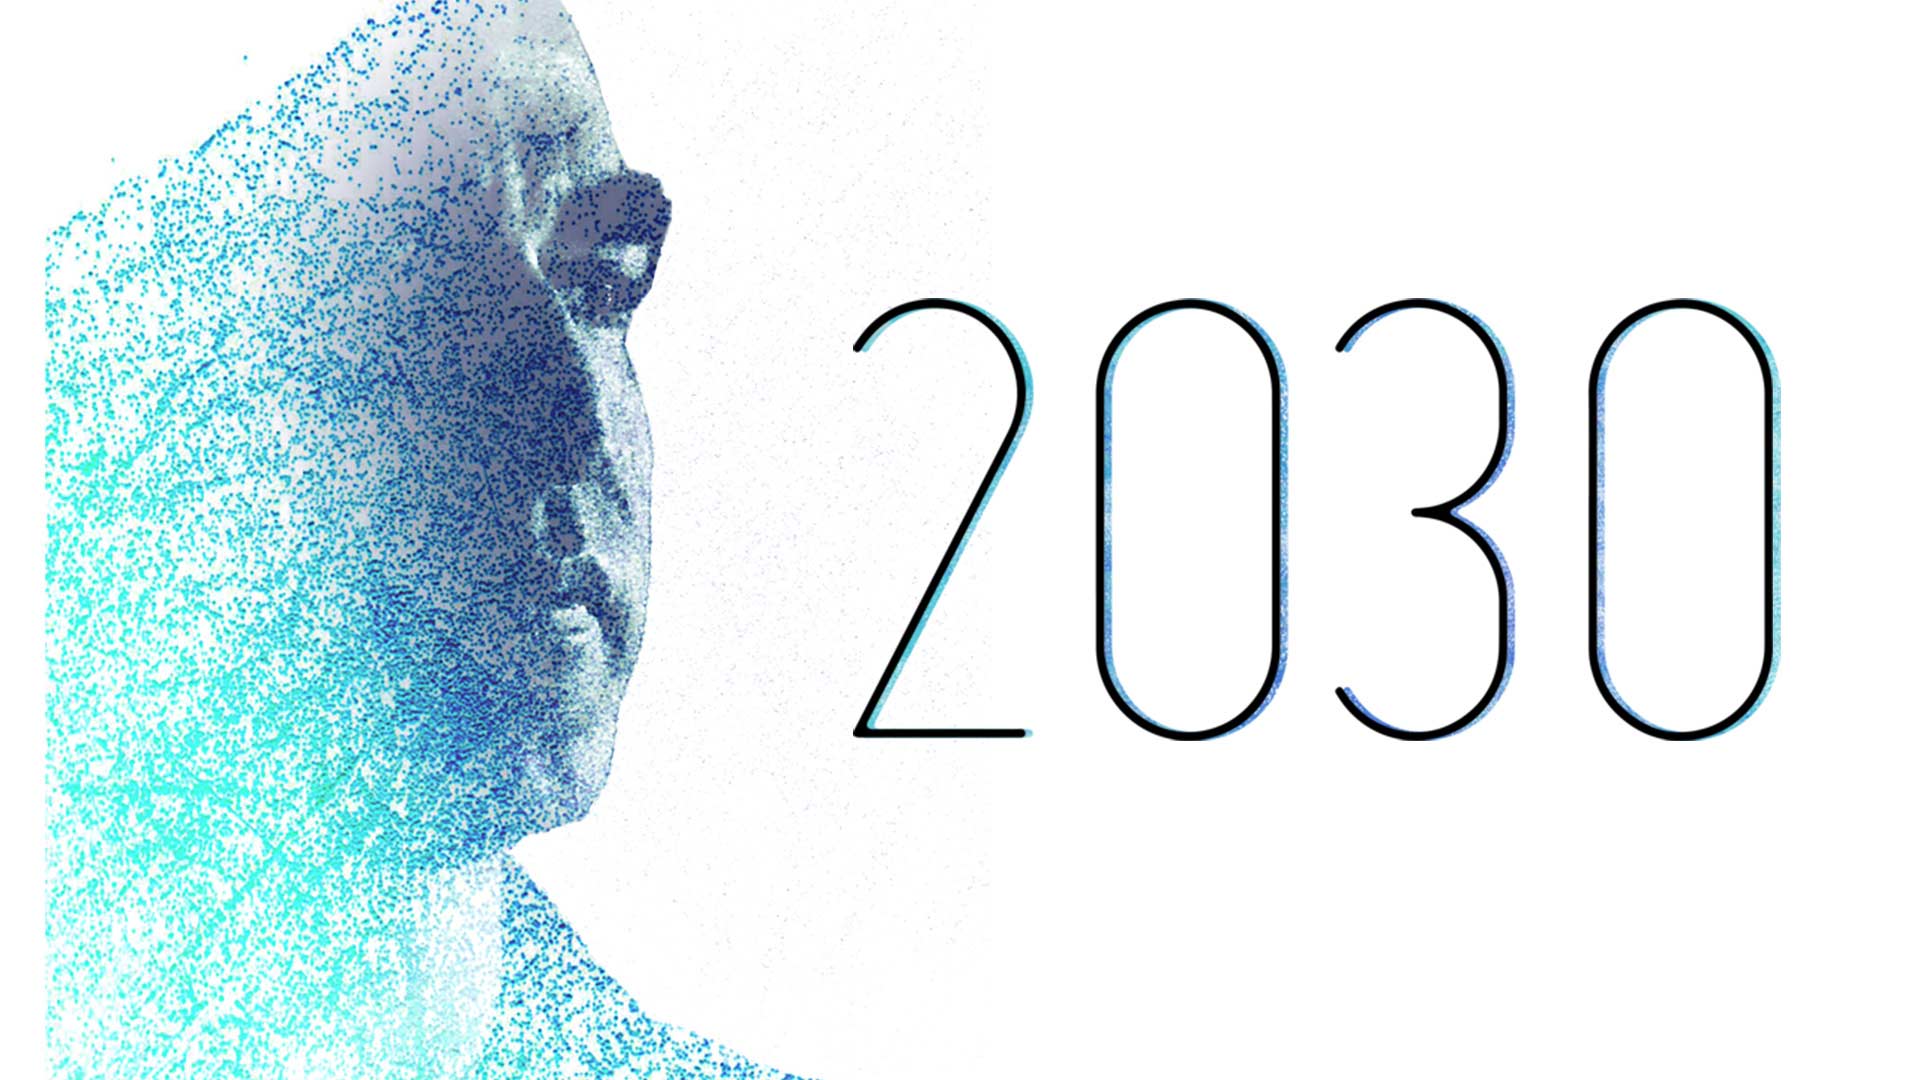 2030 | Official Trailer - Watch Film Free @FlixHouse